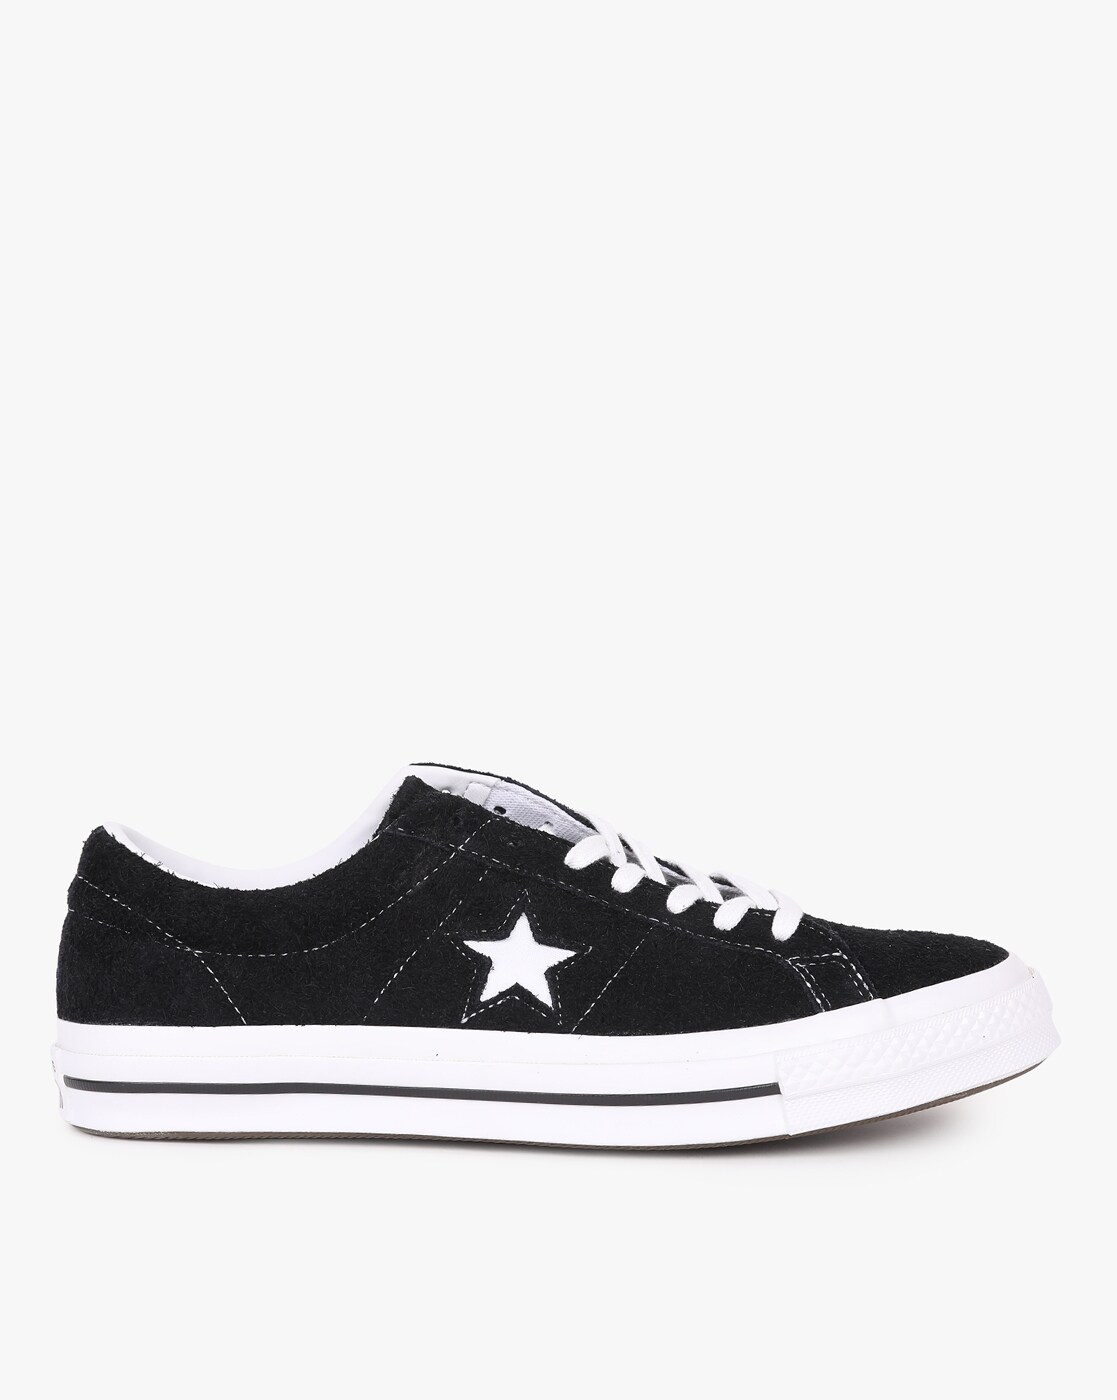 Buy Black Sports Shoes for Men by CONVERSE Online | Ajio.com